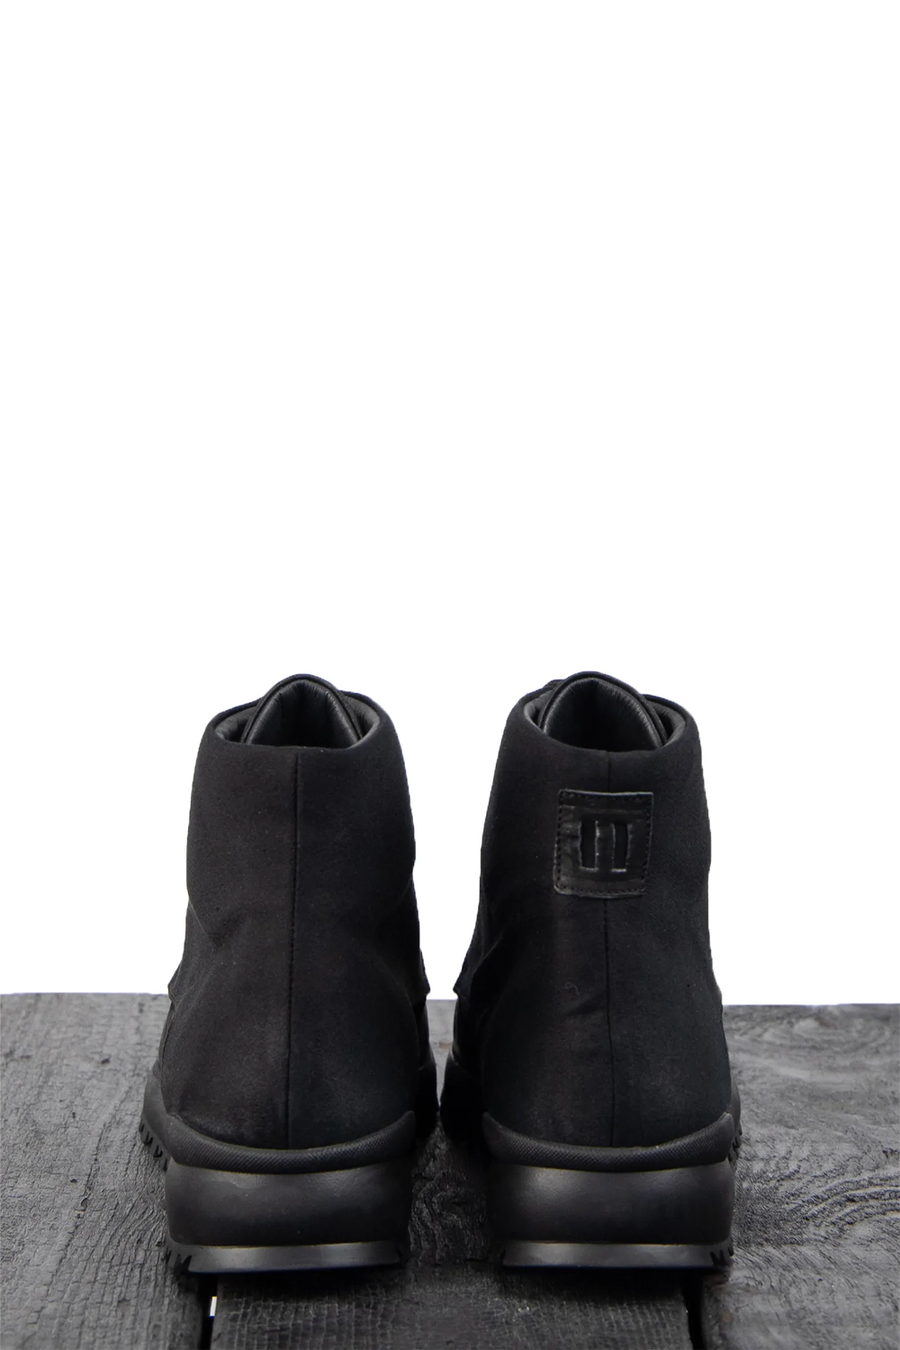 Buy the Hannes Roether Leather Canvas Chelsea Boot Black at Intro. Spend £50 for free UK delivery. Official stockists. We ship worldwide.